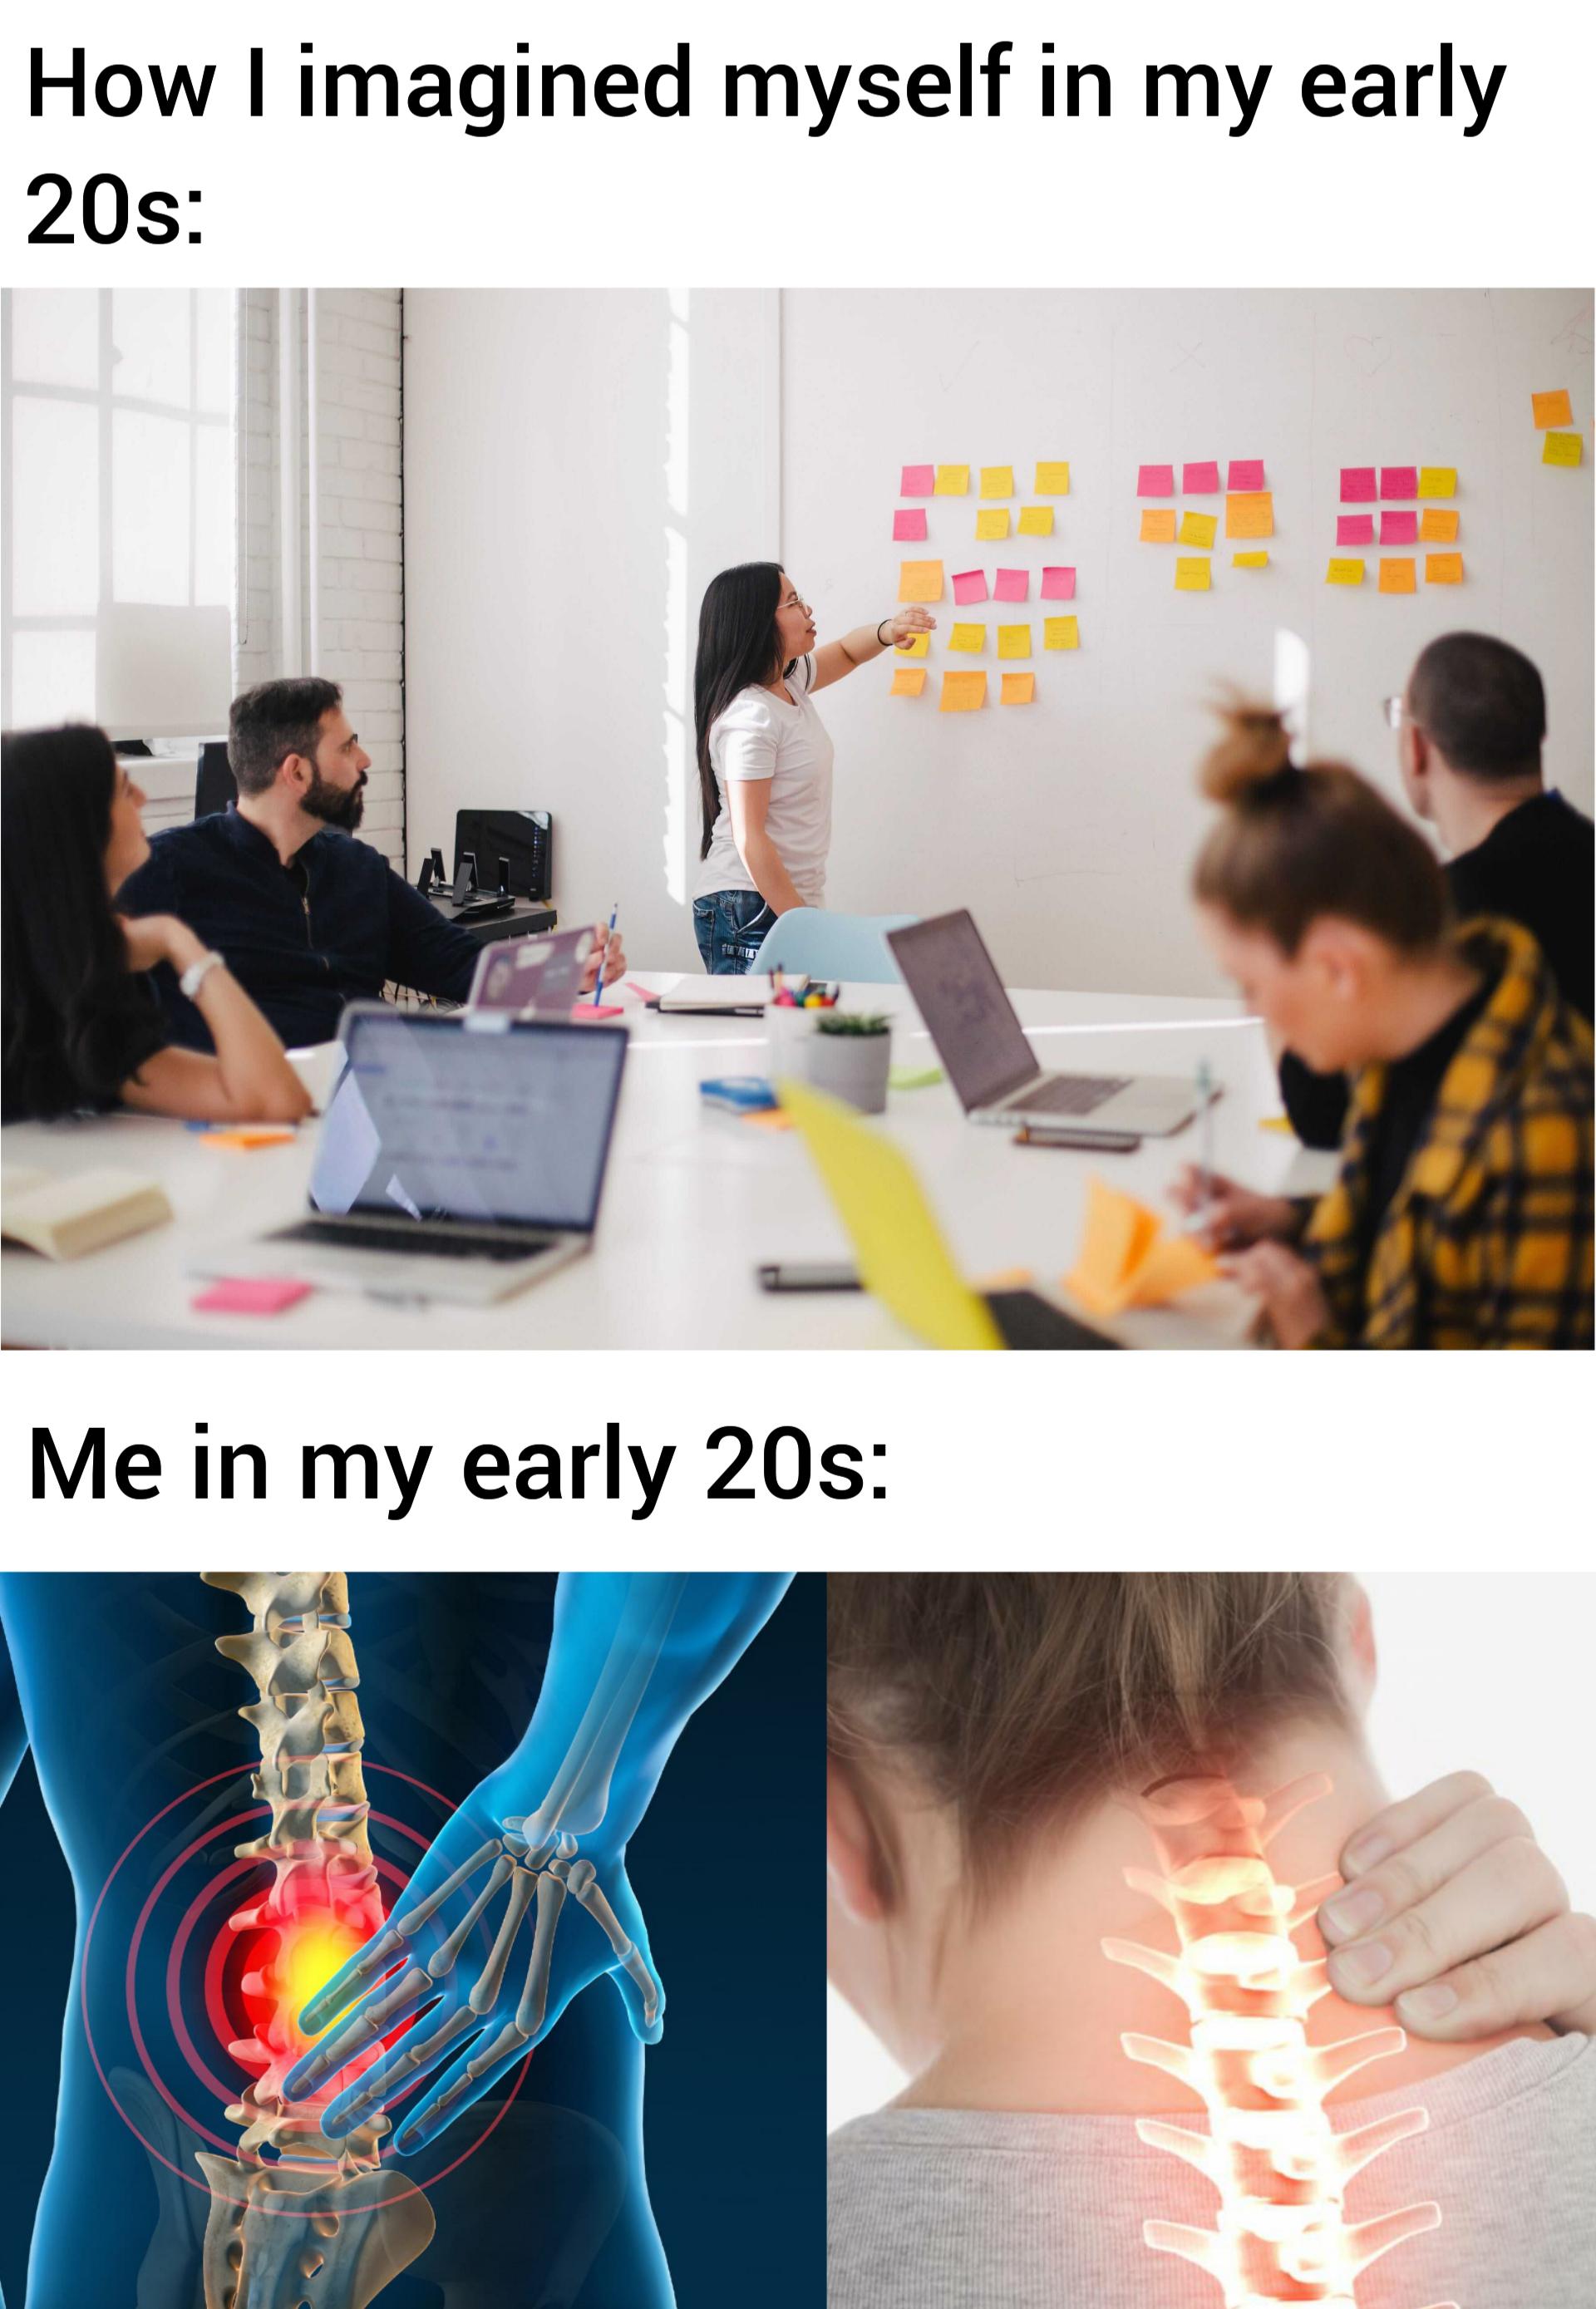 dank memes - How I imagined myself in my early 20s Me in my early 20s